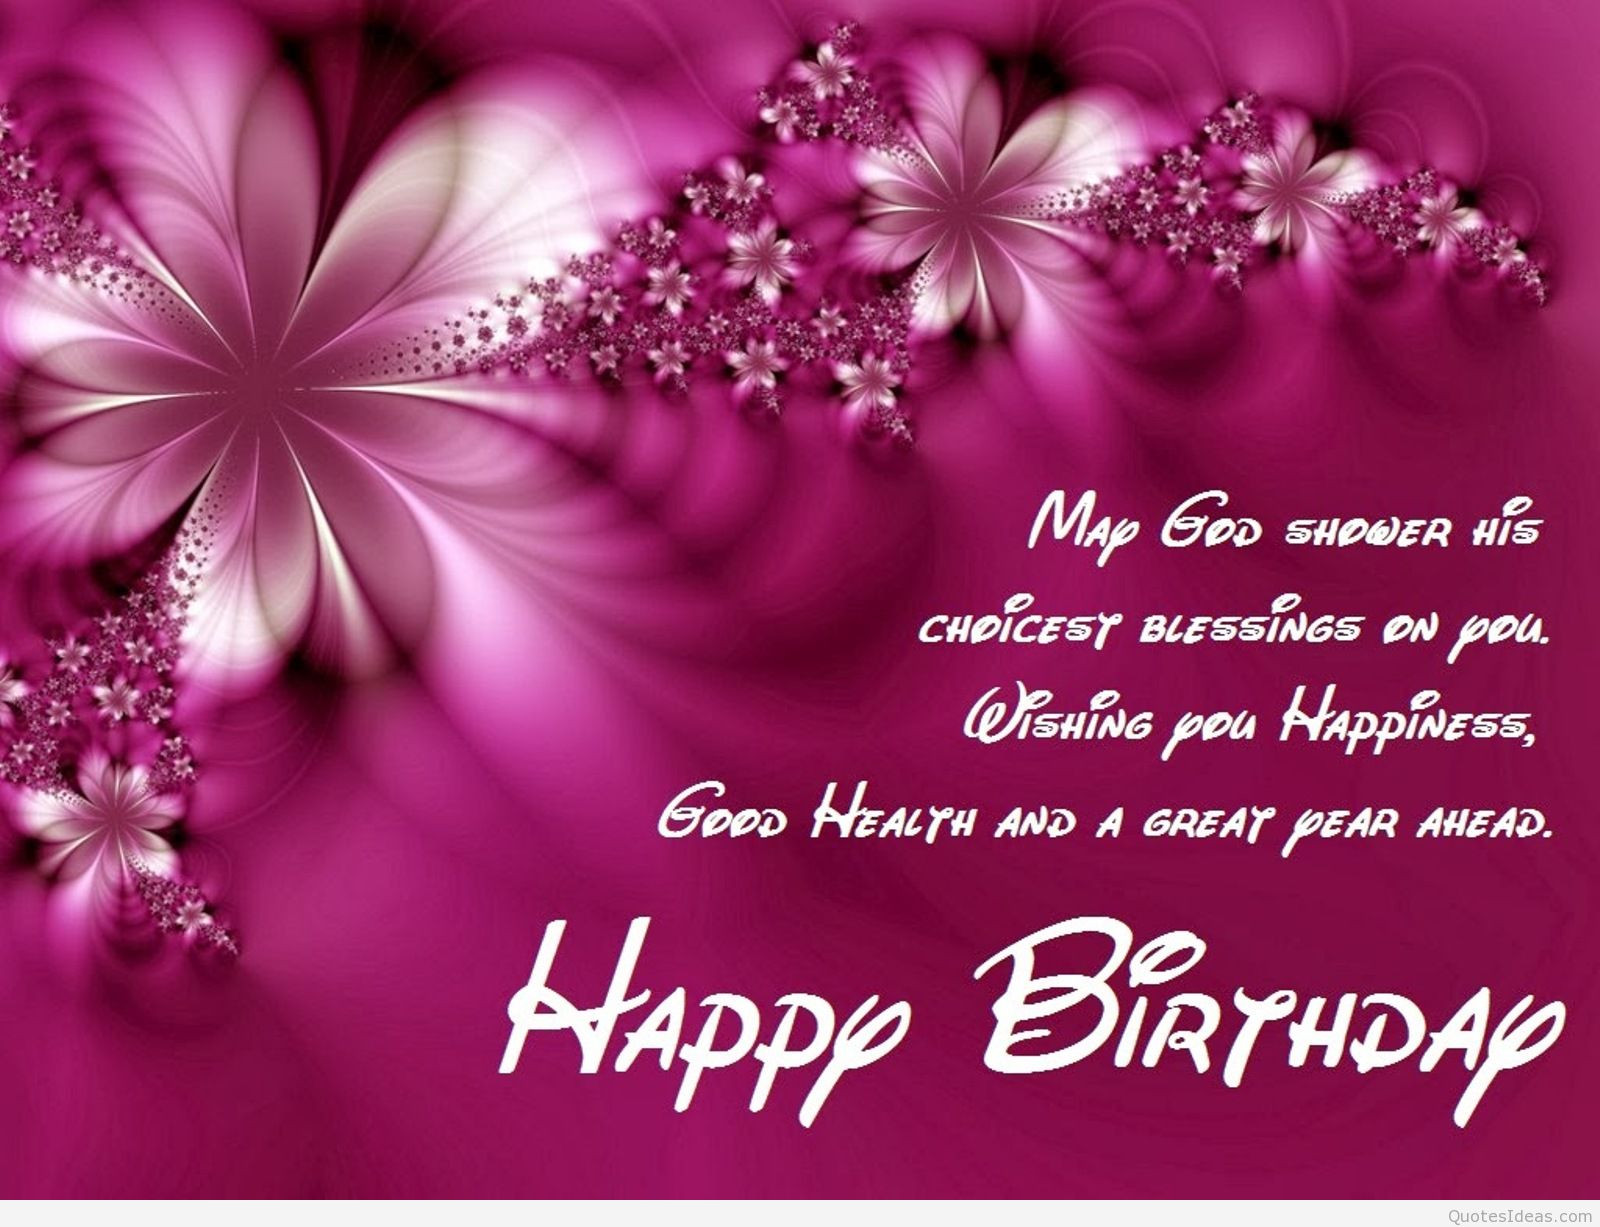 Happy Birthday Sis Quotes
 Wonderful happy birthday sister quotes and images